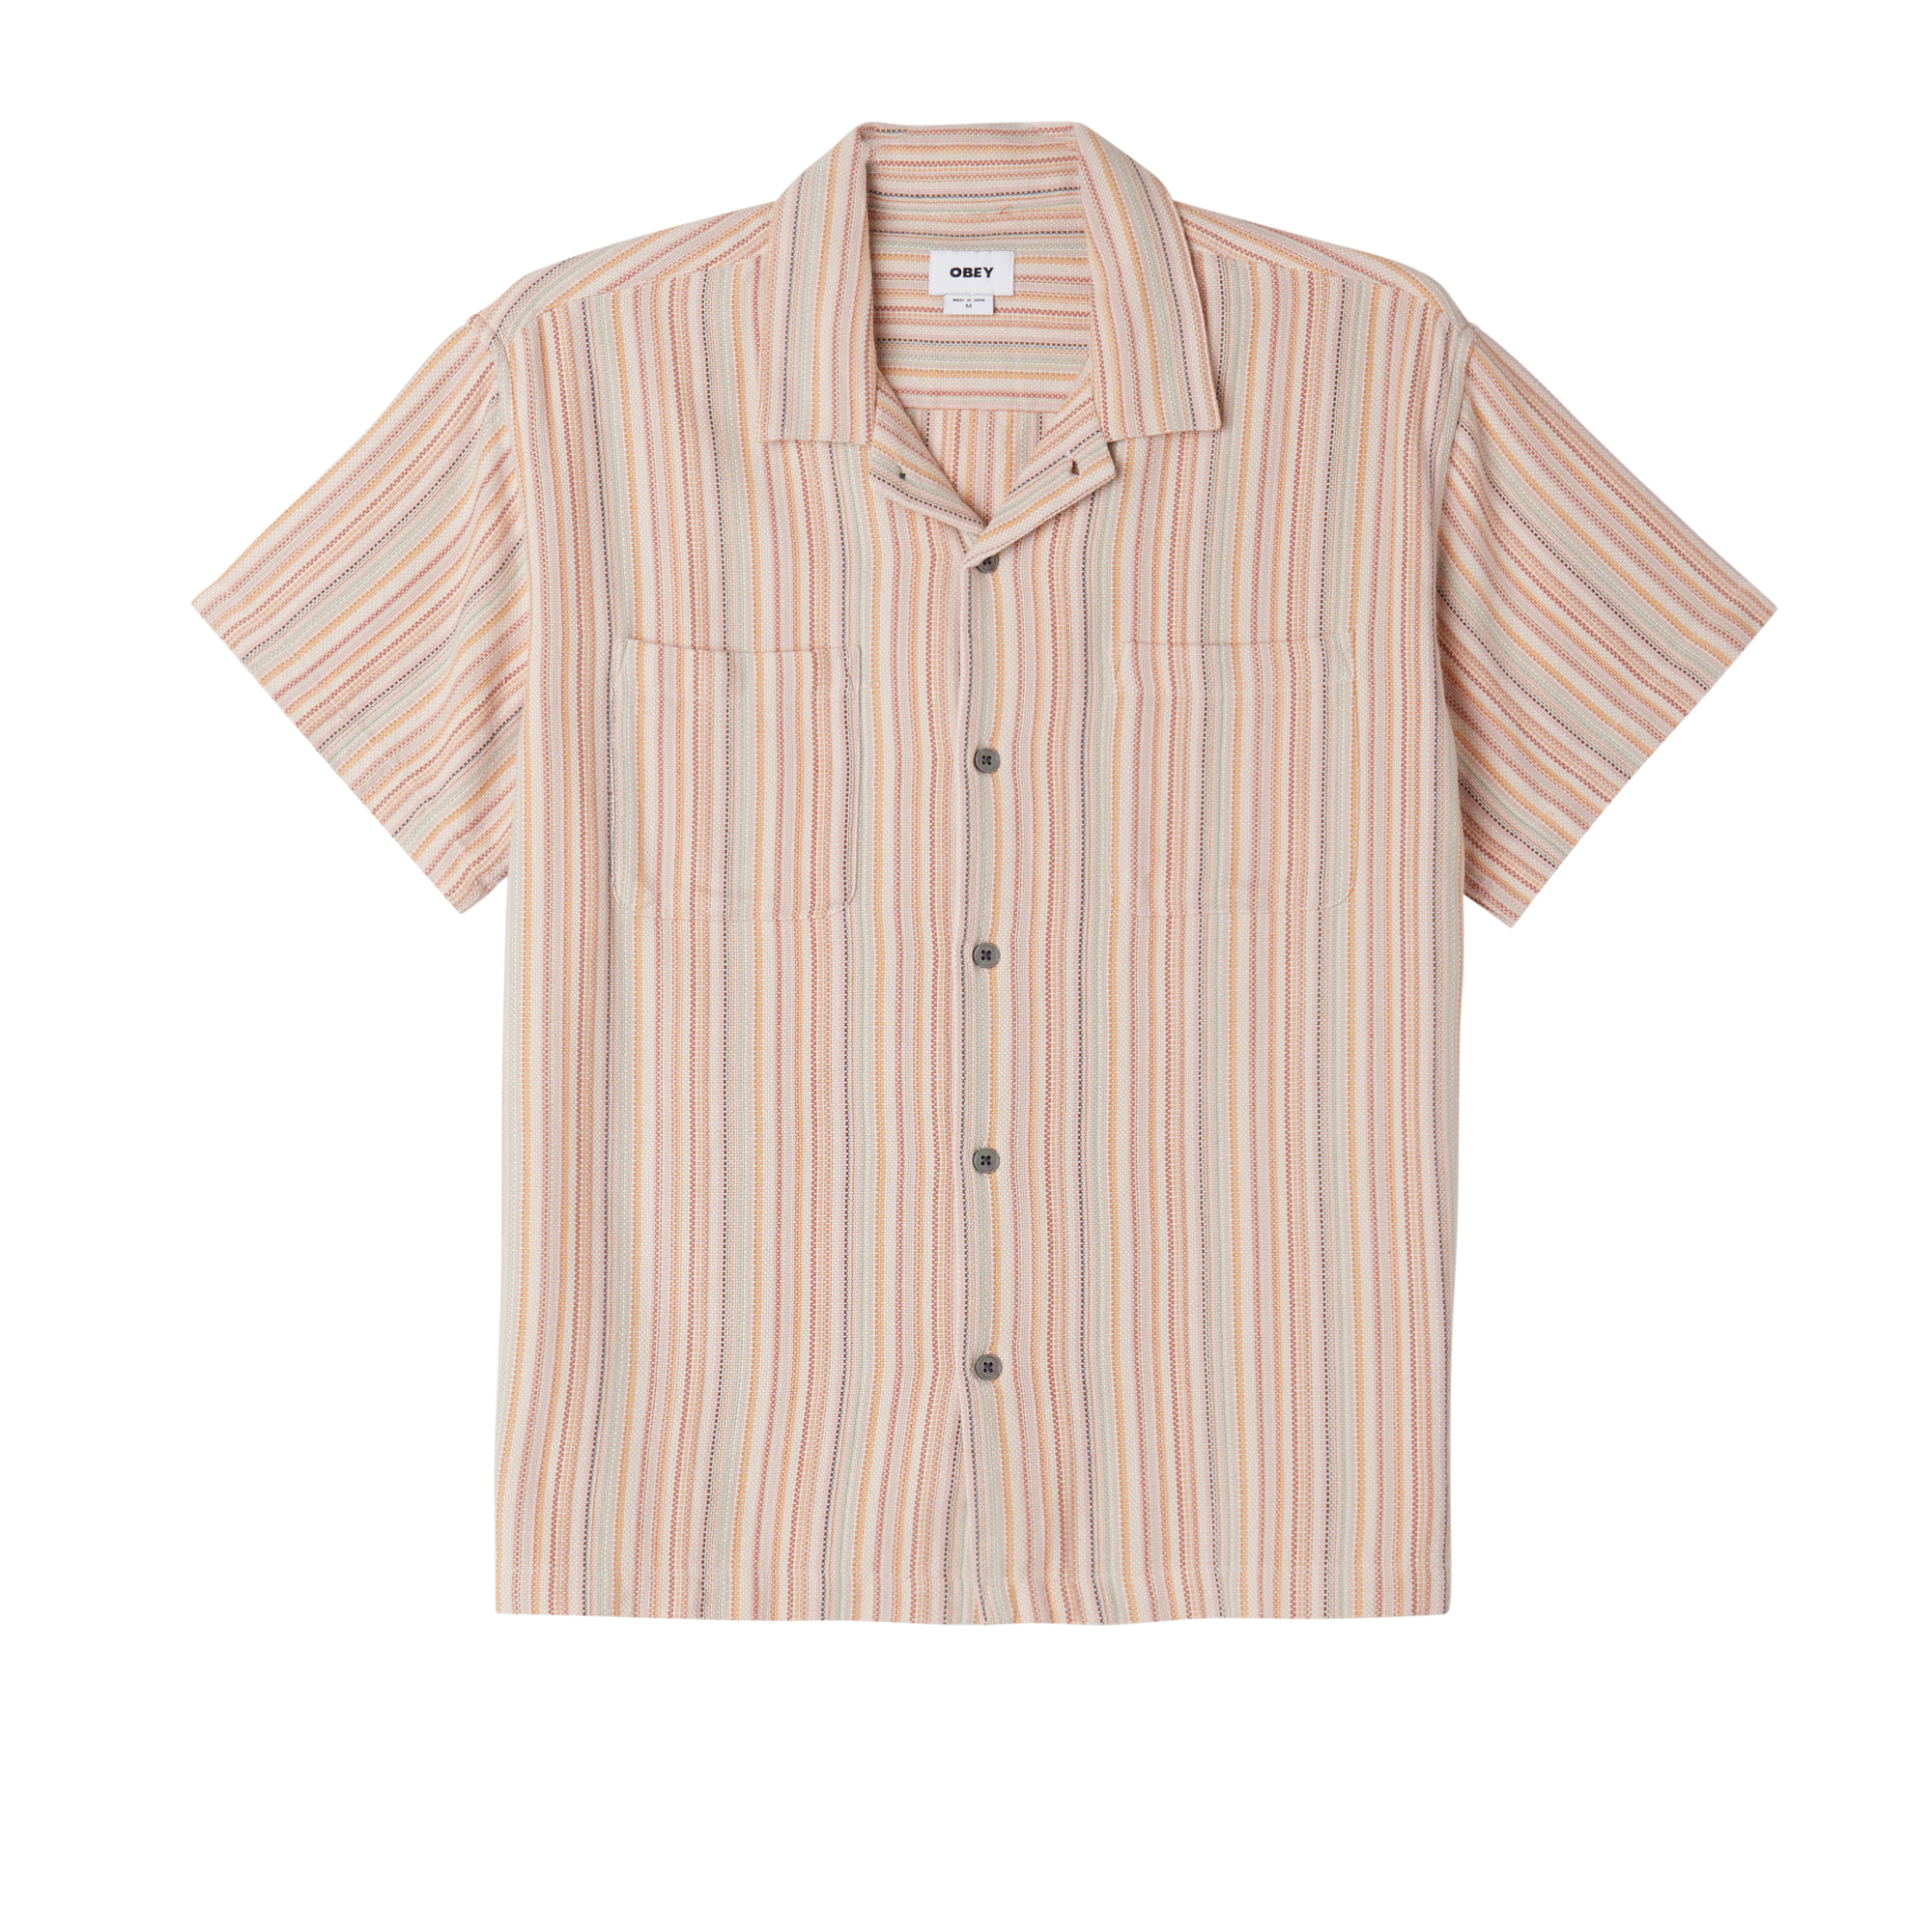 Obey Talby Shirt - Unbleached Multi